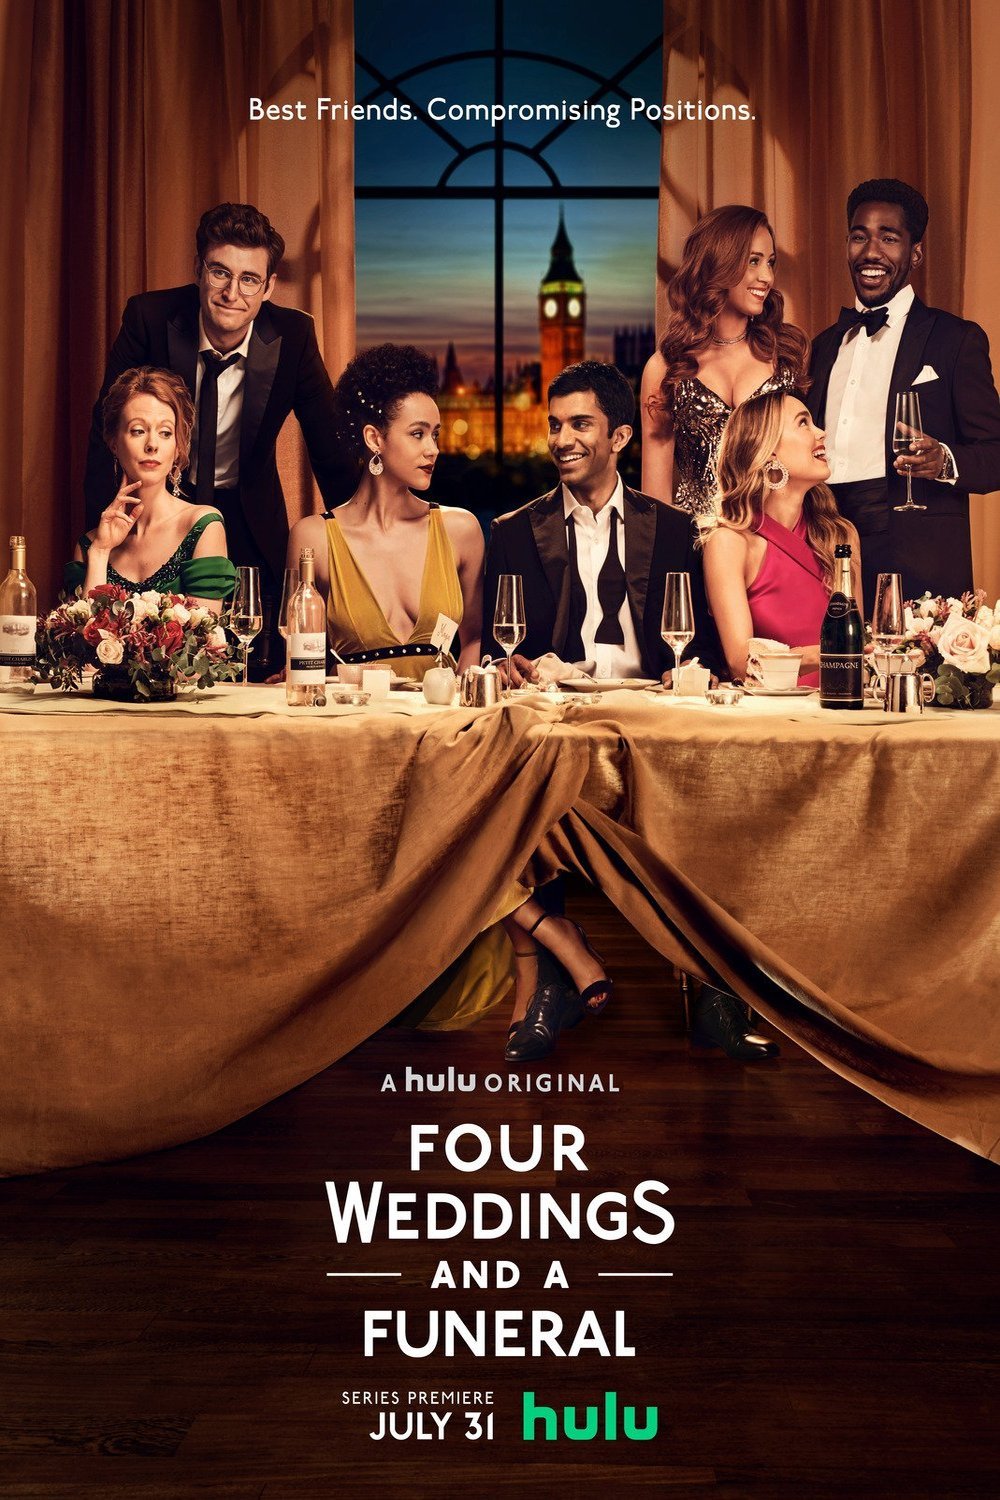 L'affiche du film Four Weddings and a Funeral